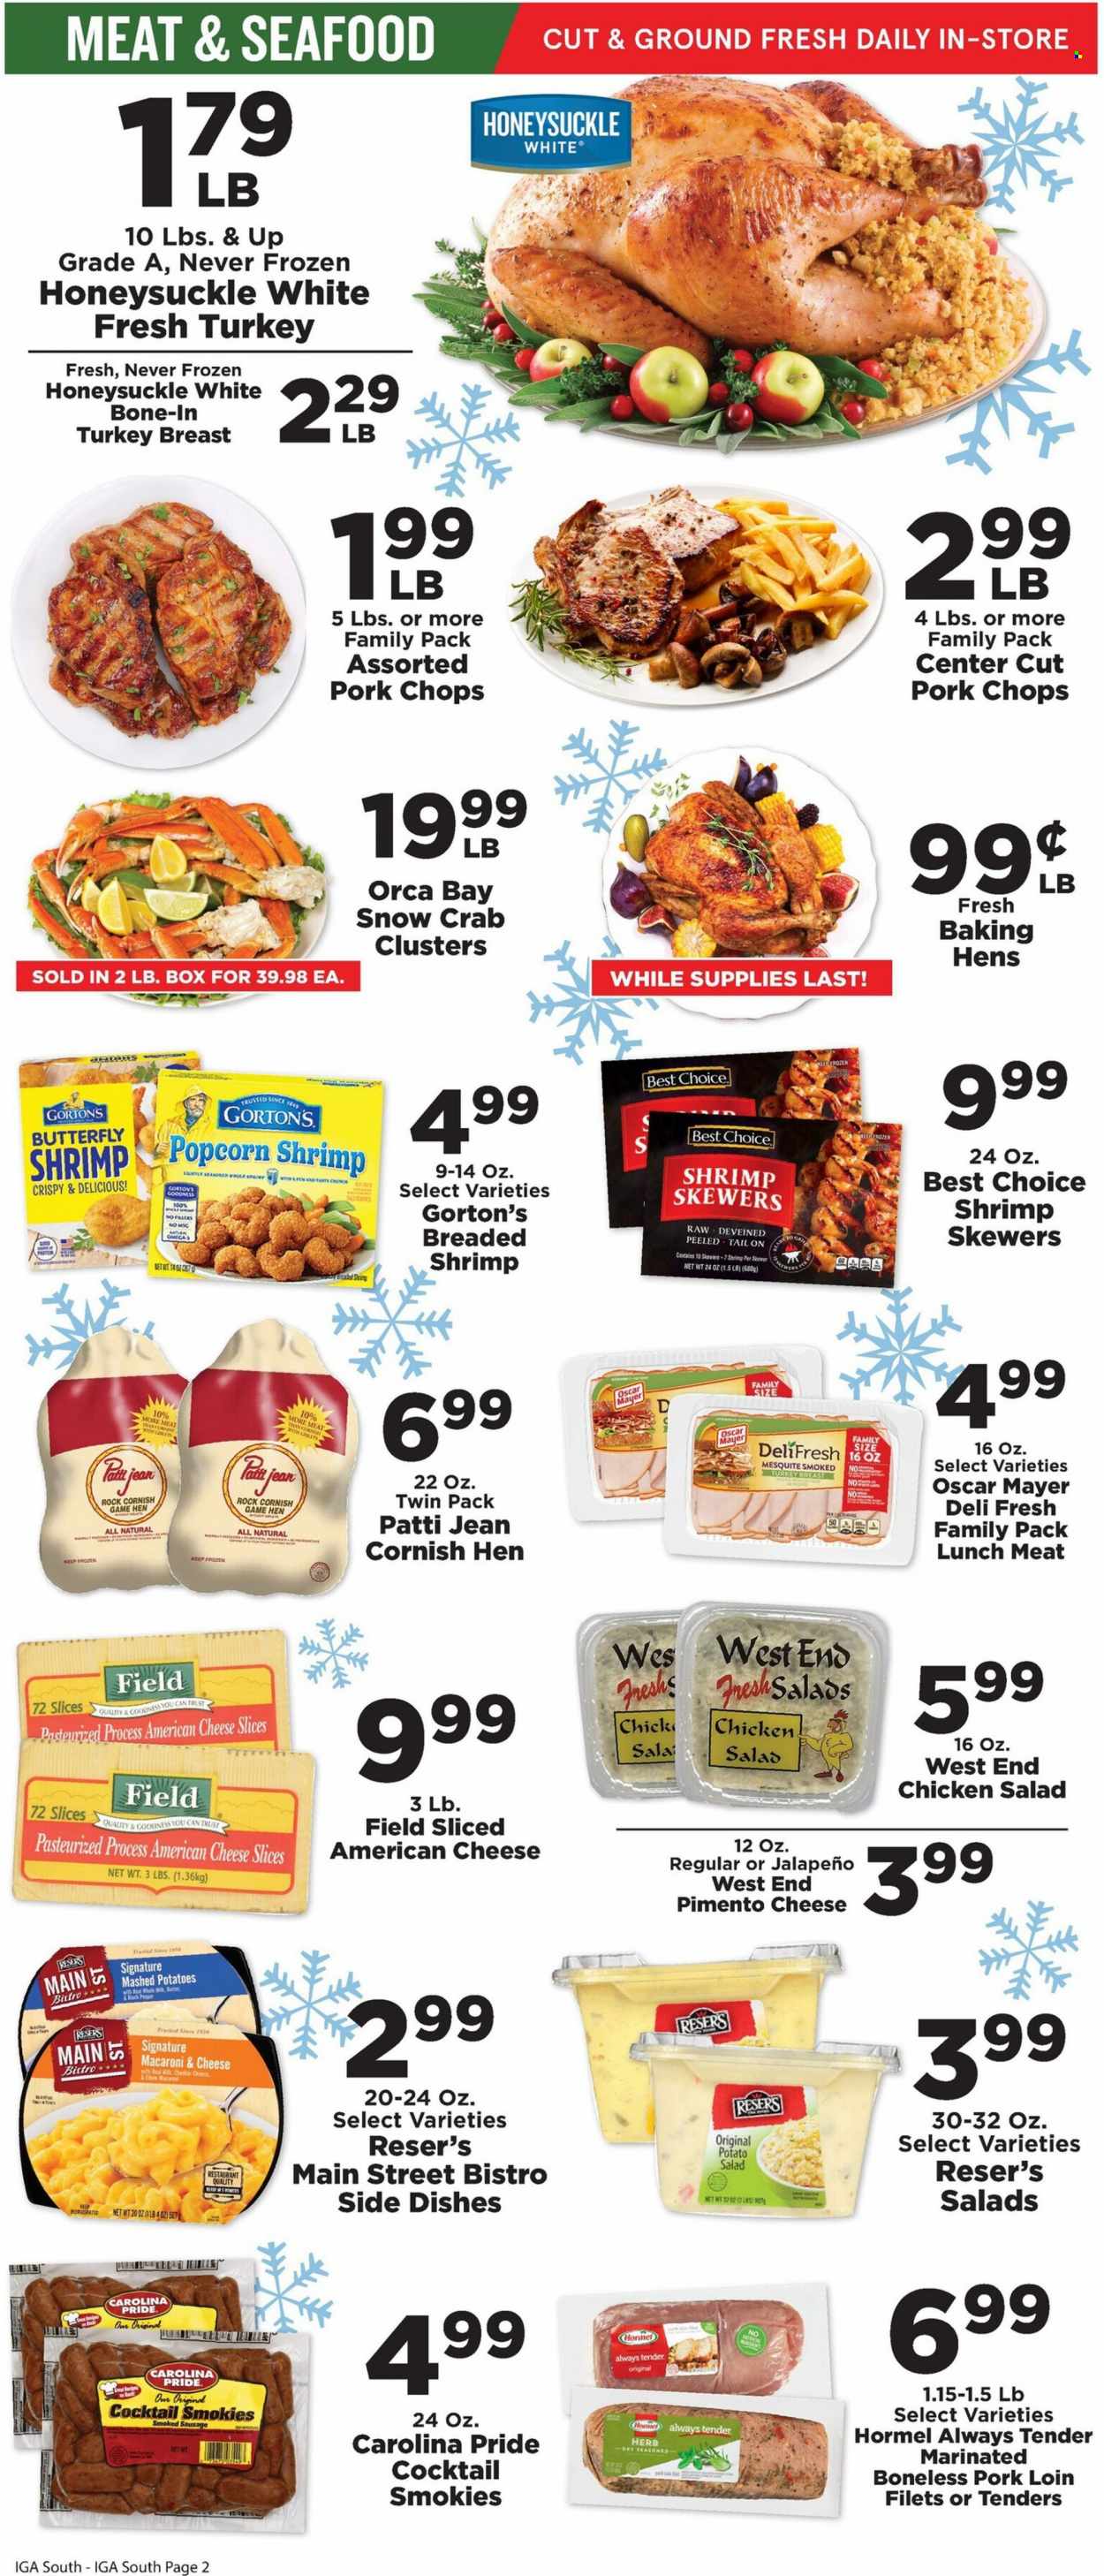 thumbnail - IGA Flyer - 12/15/2021 - 12/28/2021 - Sales products - corn, salad, seafood, crab, shrimps, Orca Bay, Gorton's, mashed potatoes, Hormel, Oscar Mayer, sausage, smoked sausage, potato salad, chicken salad, lunch meat, american cheese, sliced cheese, cheese, pepper, herbs, cornish hen, pork chops, pork loin, pork meat, N All. Page 2.